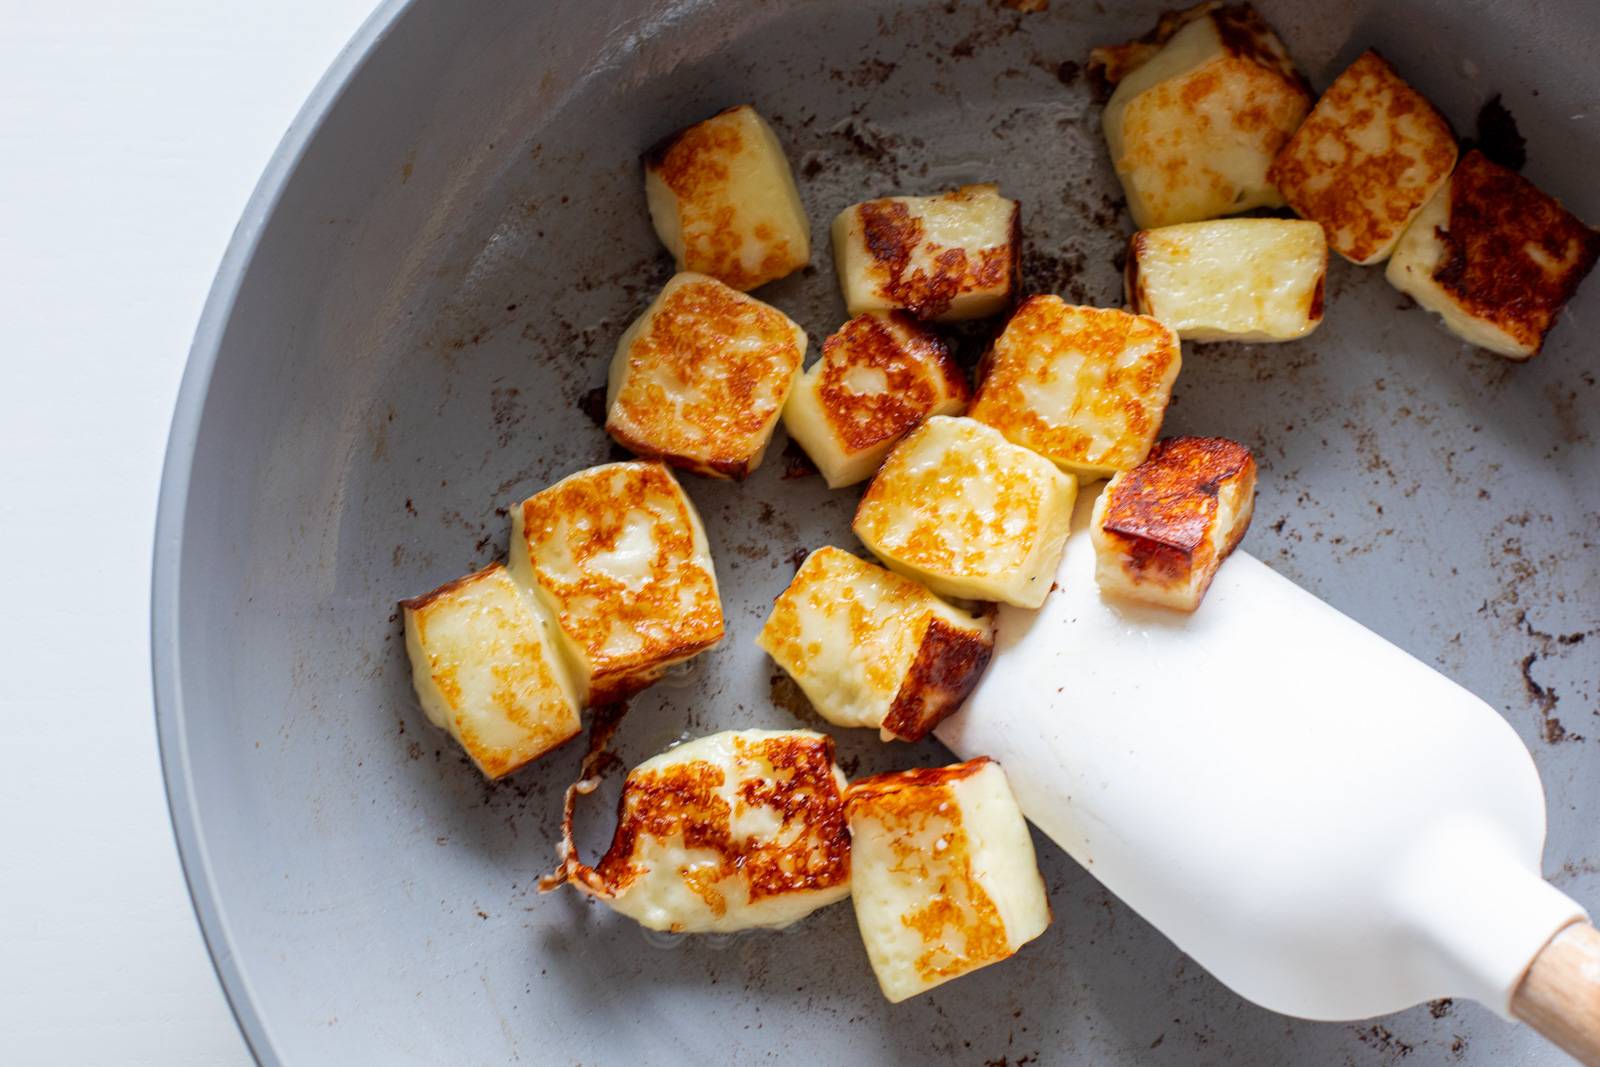 Bread cubes fried up in a pan.